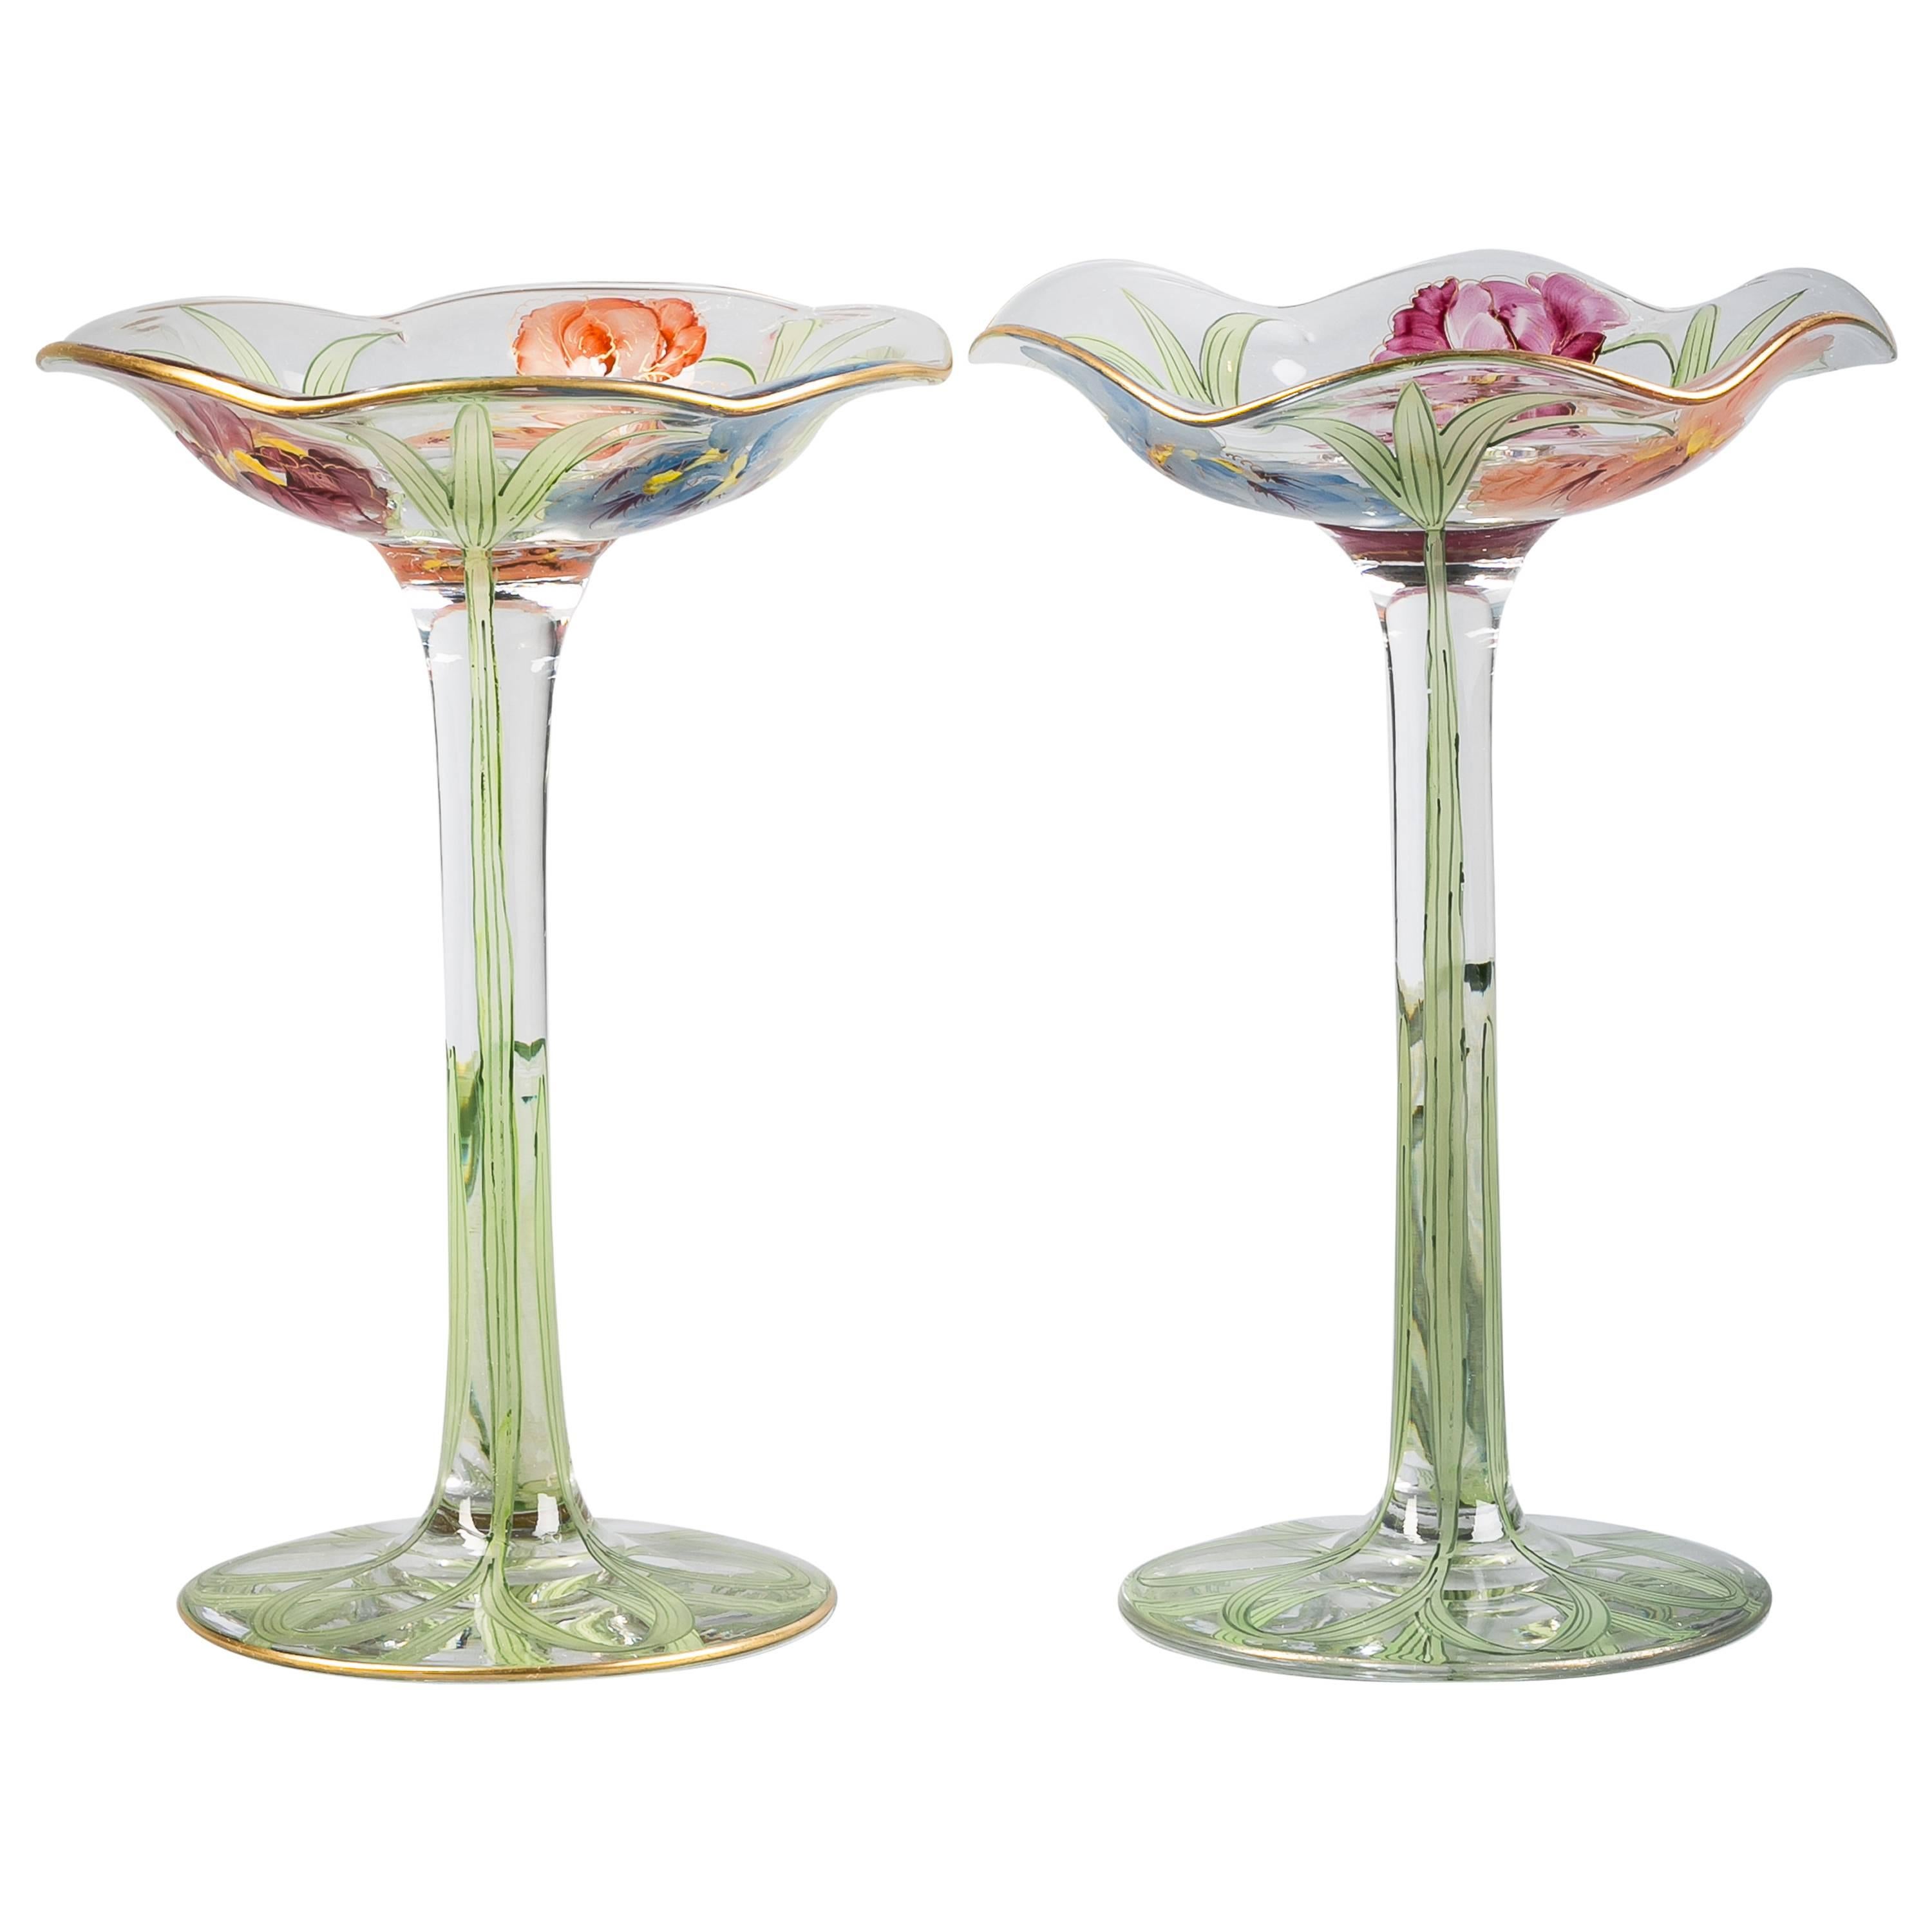 Pair of American Enameled Glass Footed Compotes, circa 1880 For Sale